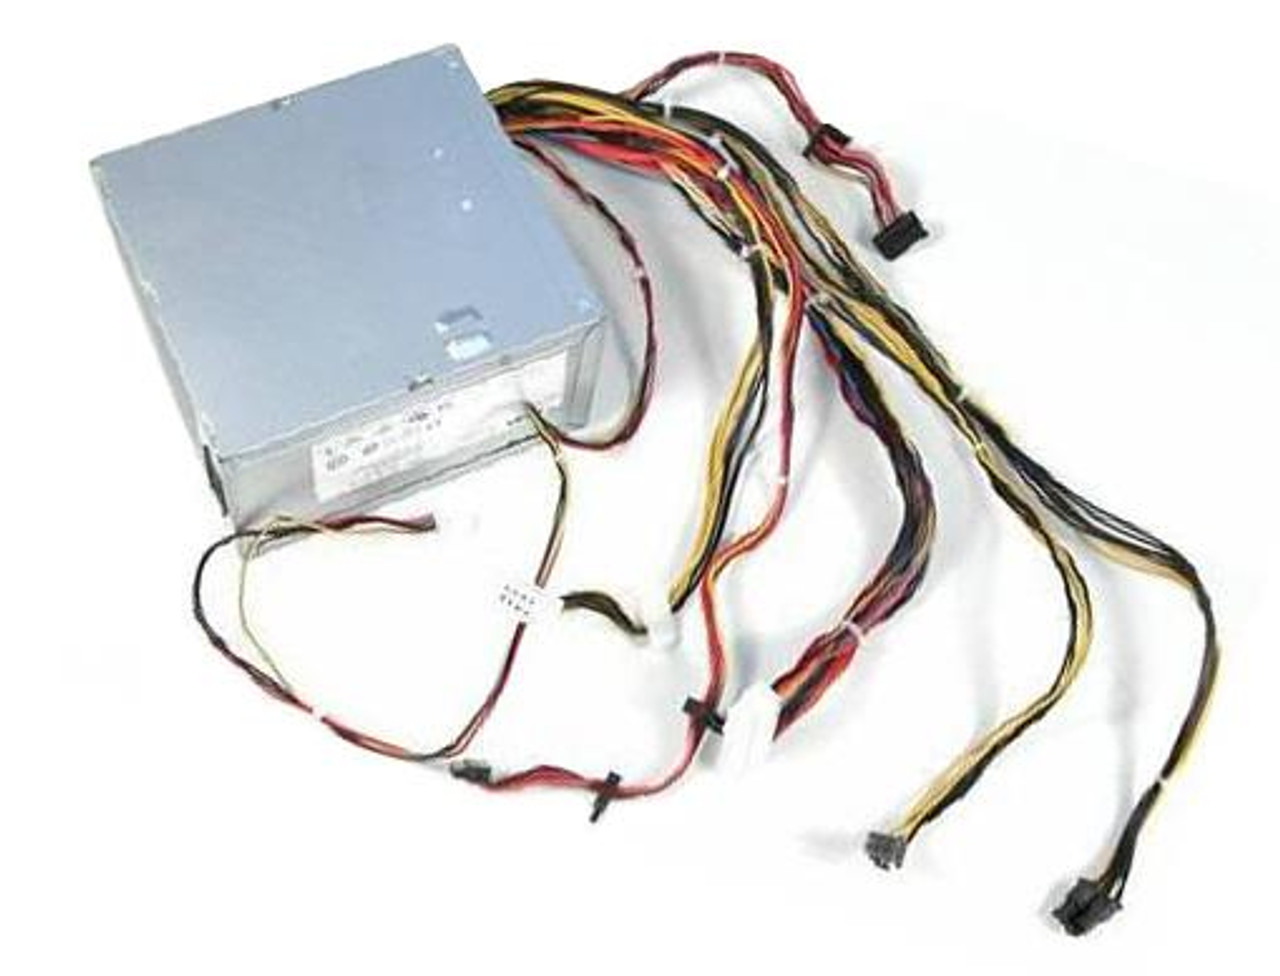 0V4NC2 Dell 525-Watts Power Supply for Precision T3500 and XPS 9100